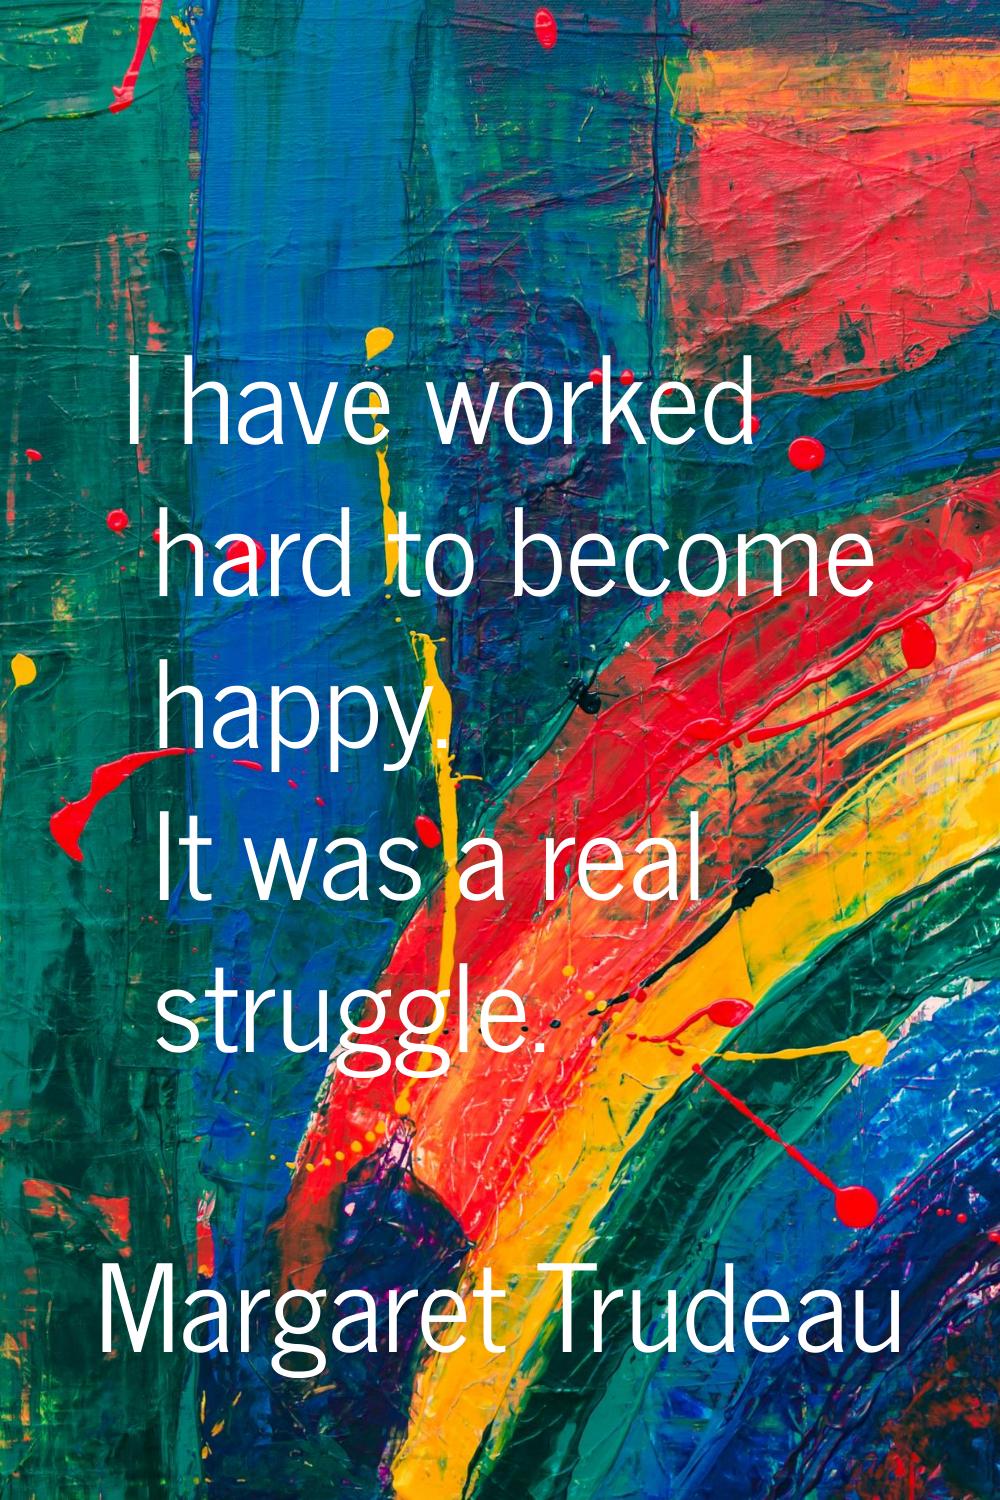 I have worked hard to become happy. It was a real struggle.